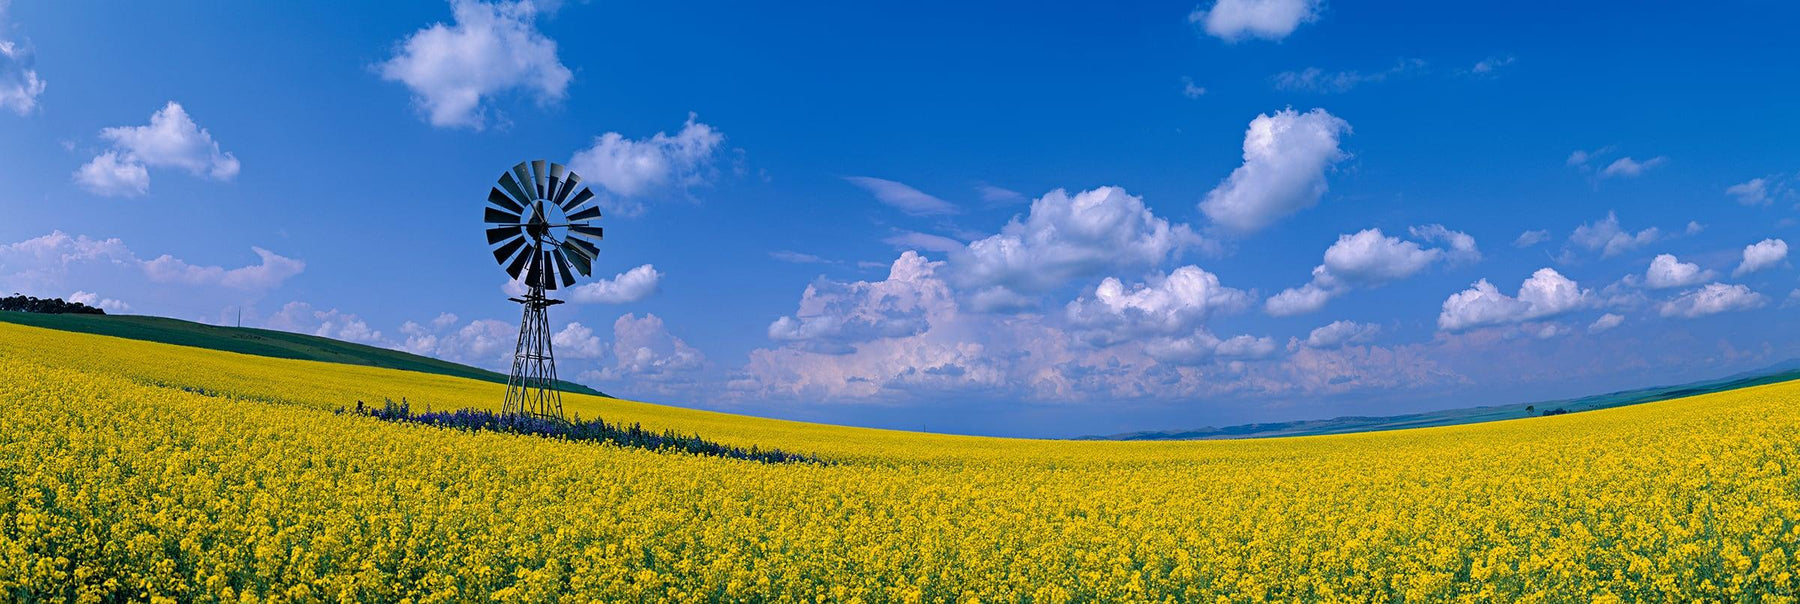 Windmill sitting in the middle of a yellow flower field in Burra Australia